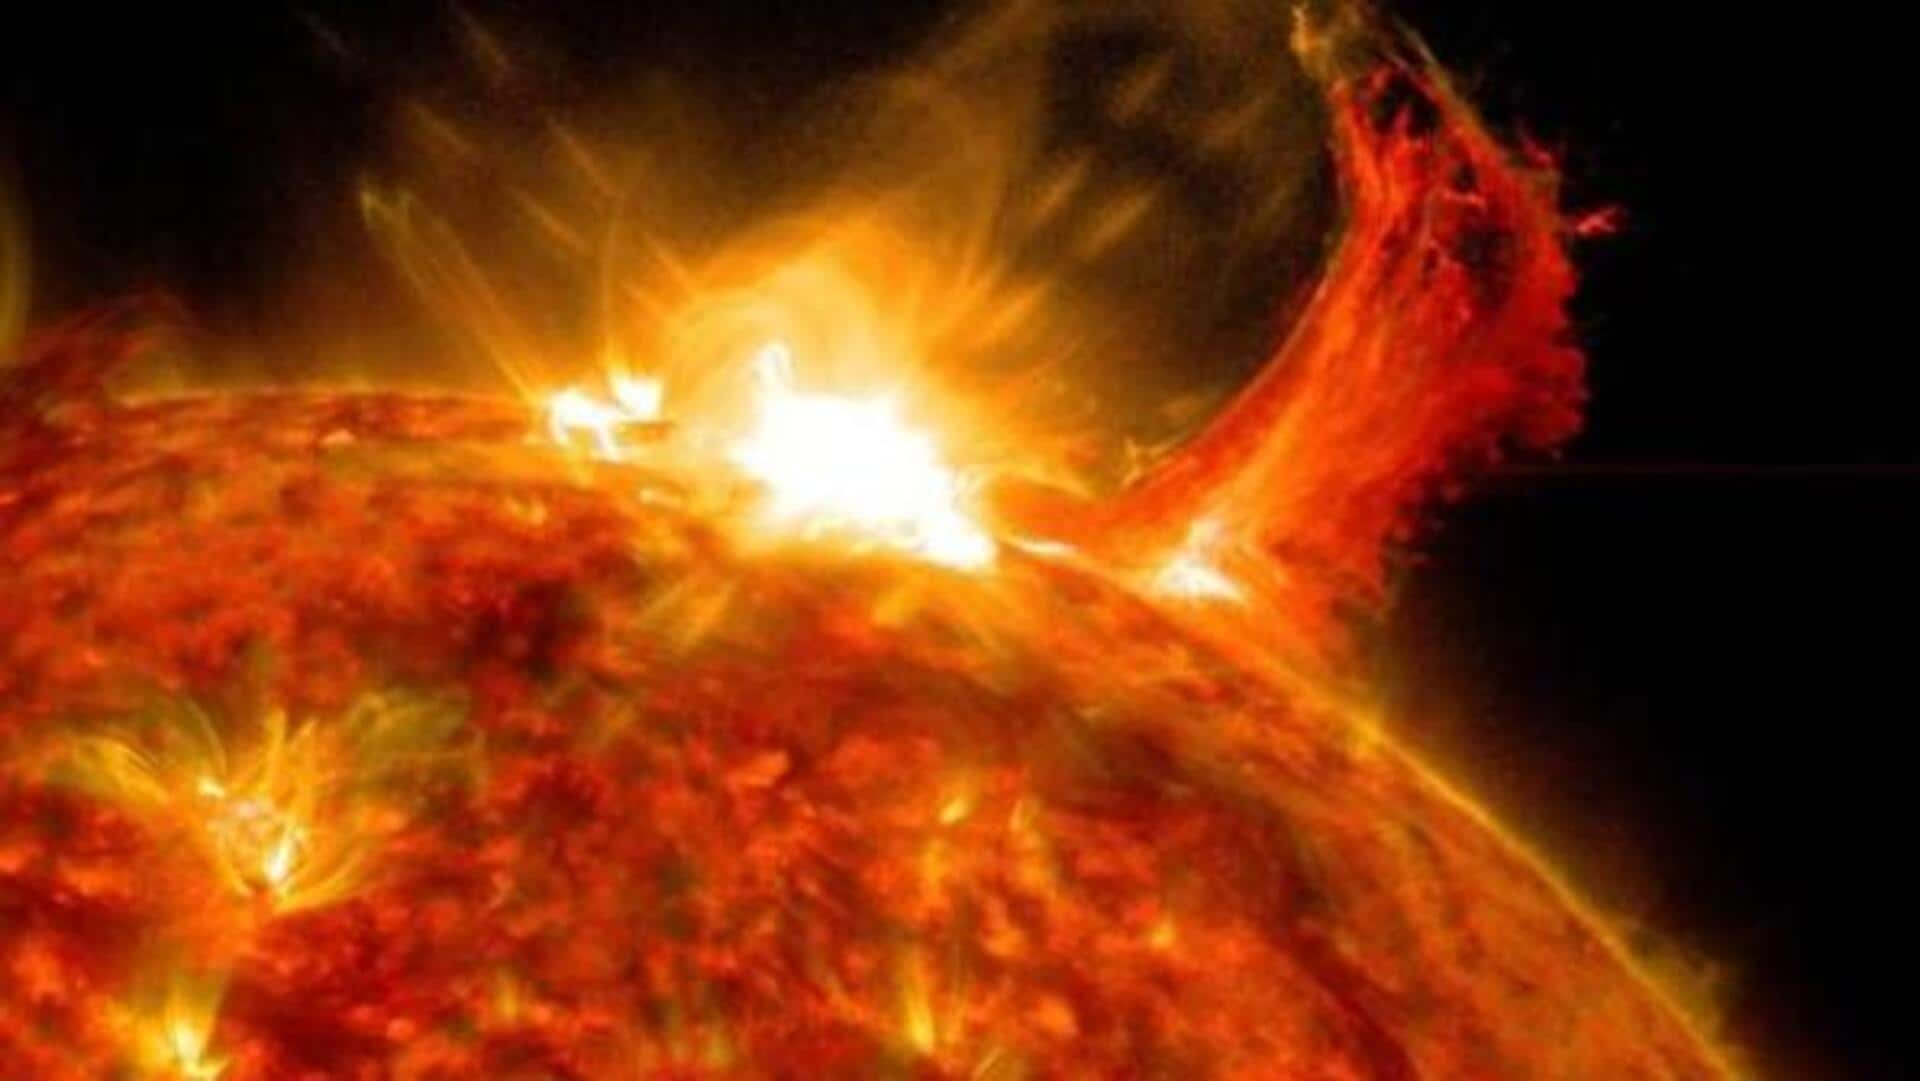 Scientists detect mysterious gamma rays from the Sun